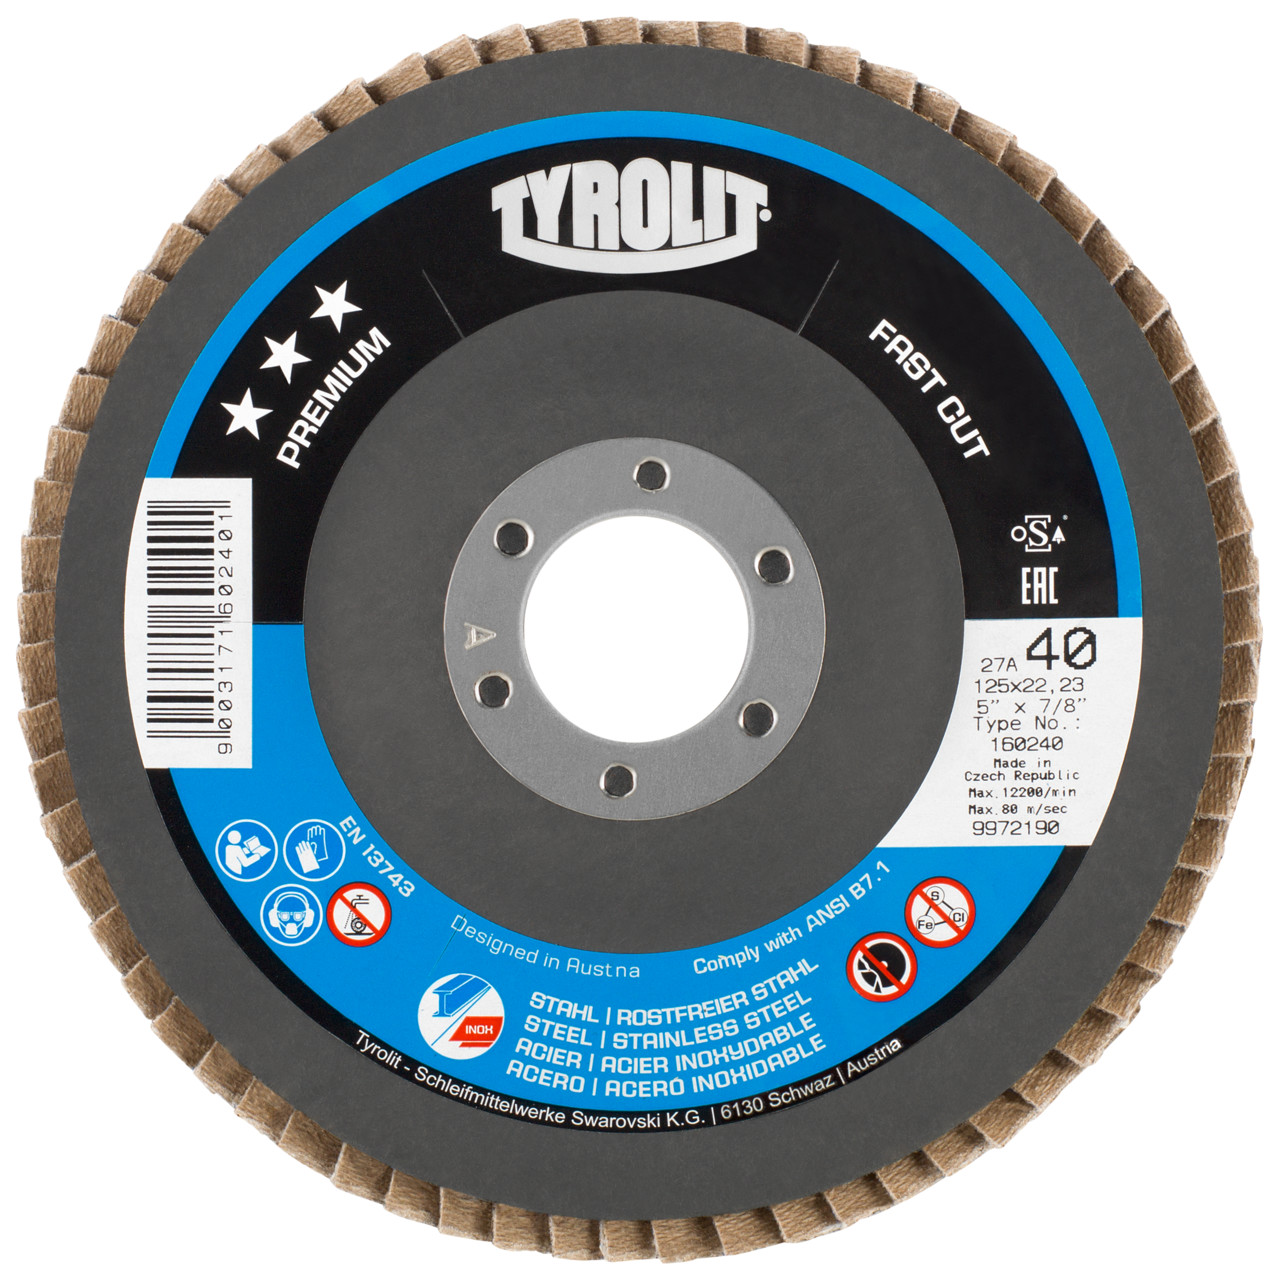 Tyrolit Serrated lock washer DxH 178x22.2 FASTCUT for steel &amp; stainless steel, P40, shape: 27A - offset version (glass fibre carrier body version), Art. 160245